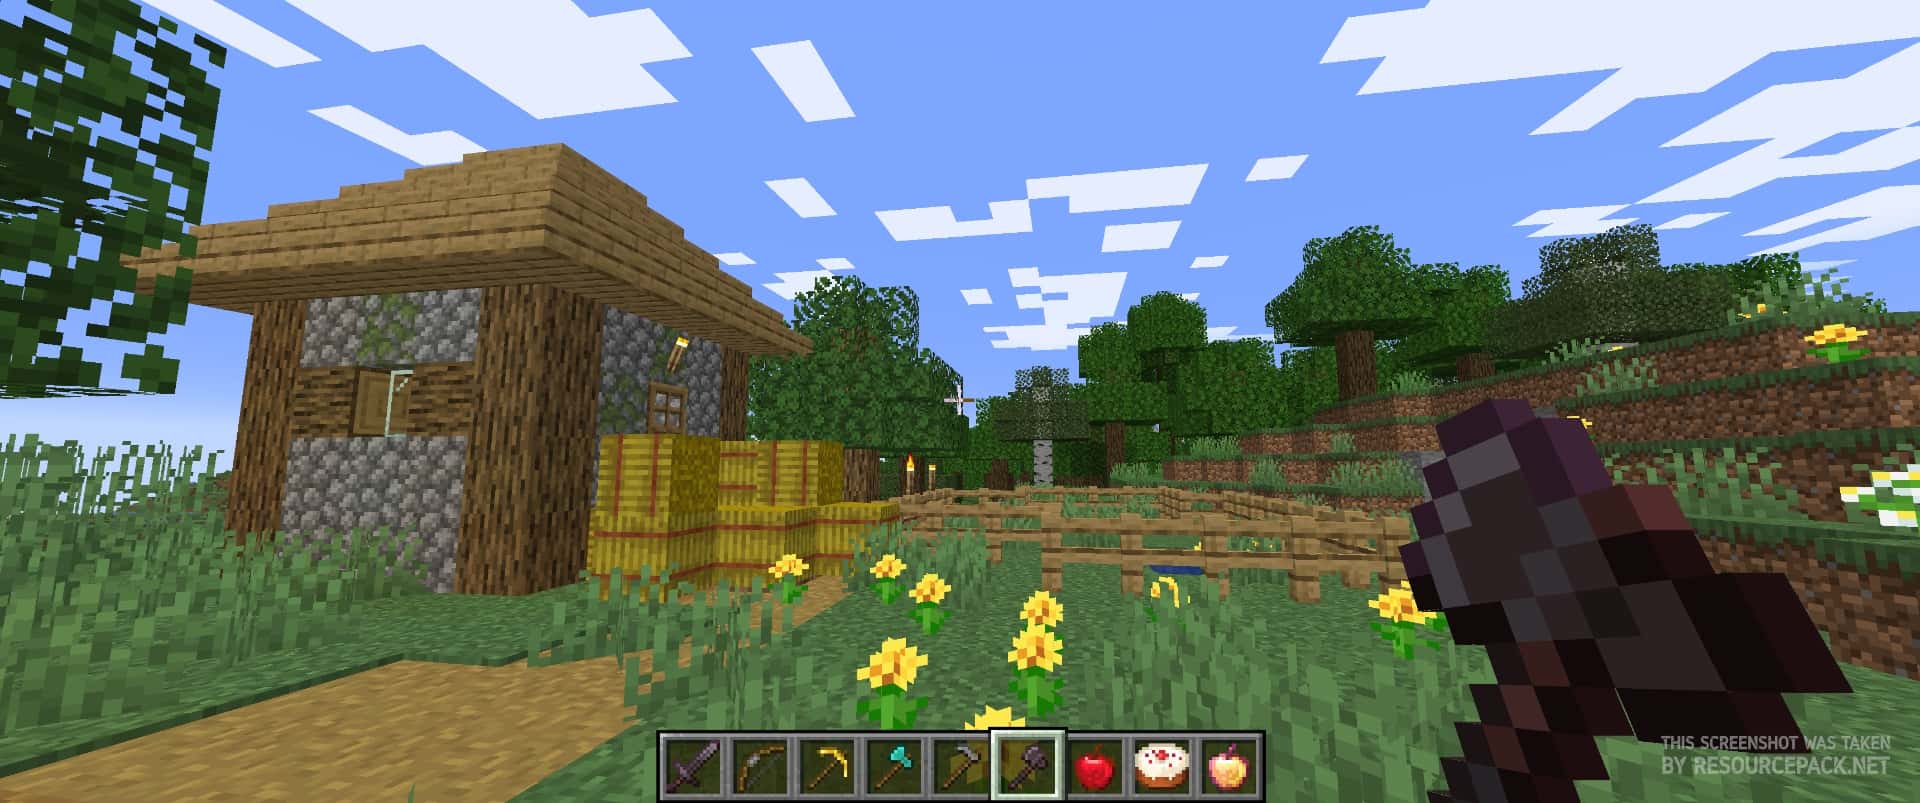 1.15.2 Adding minecraft.planks tag for a block do not provide